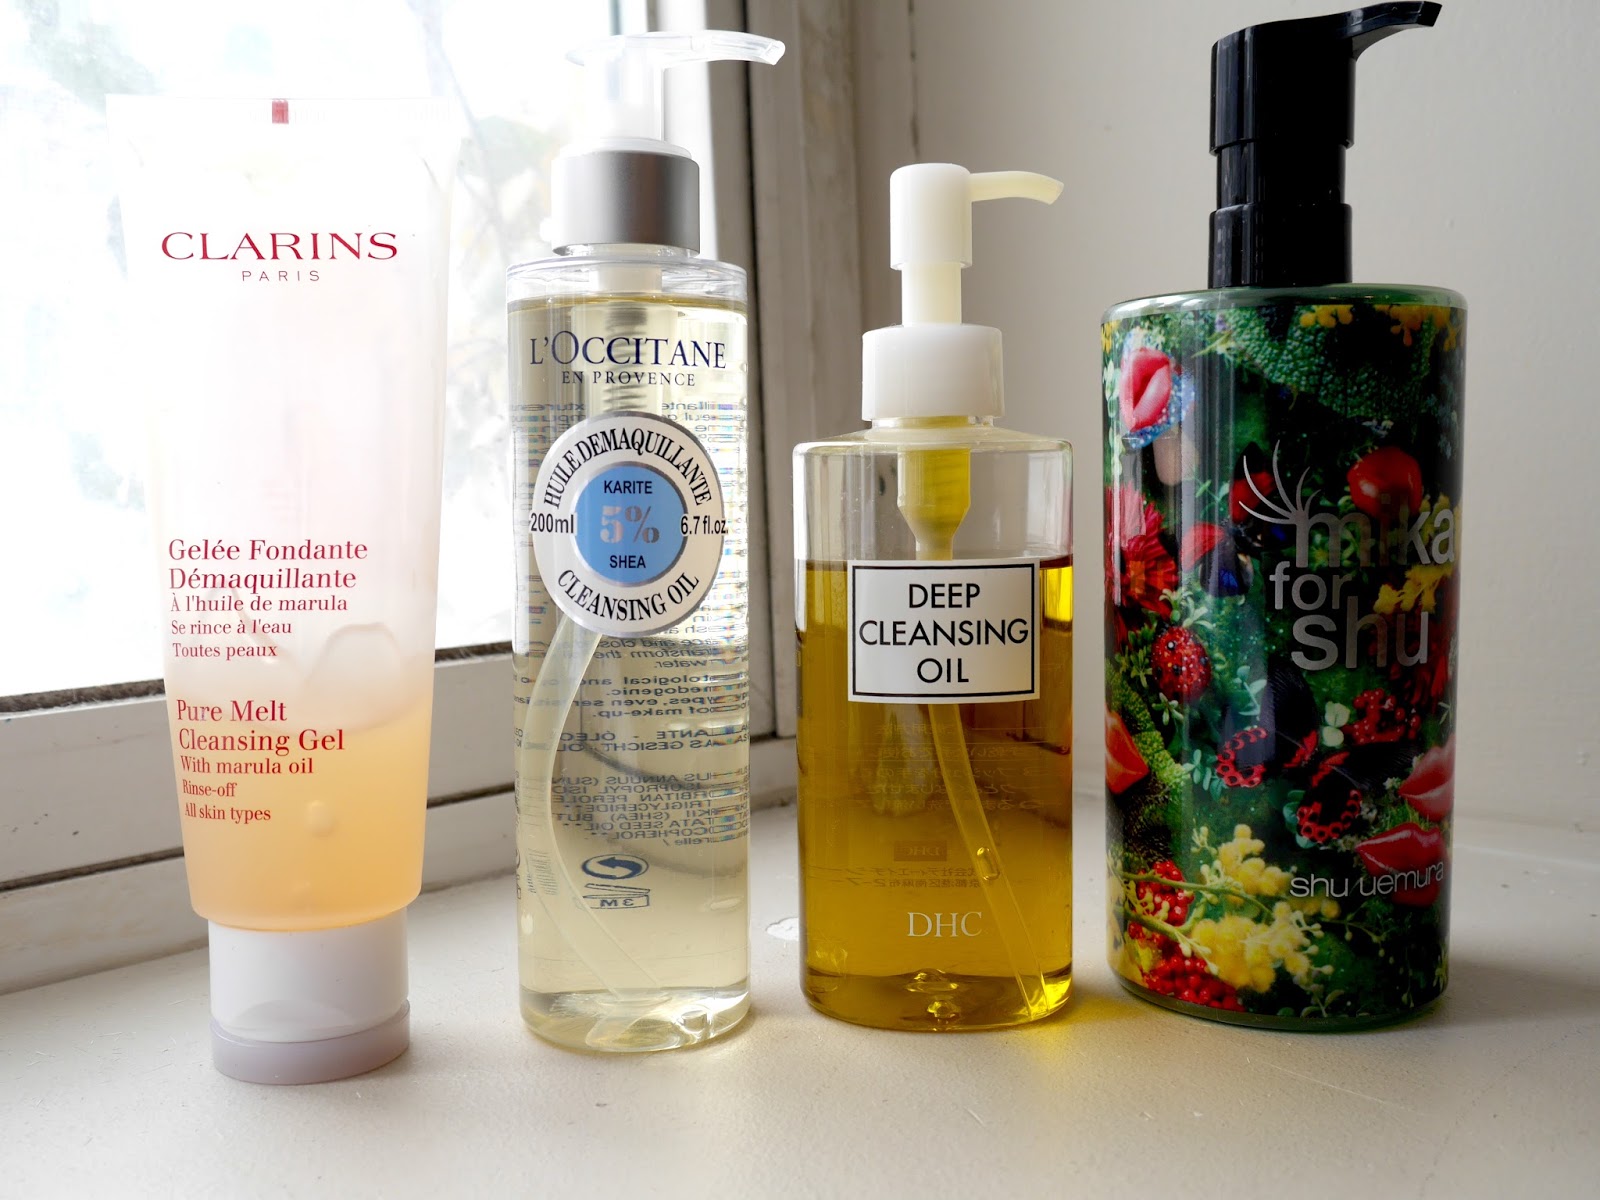 clarins pure melt cleansing gel l'occitane dhc mika for shu anti-oxidant